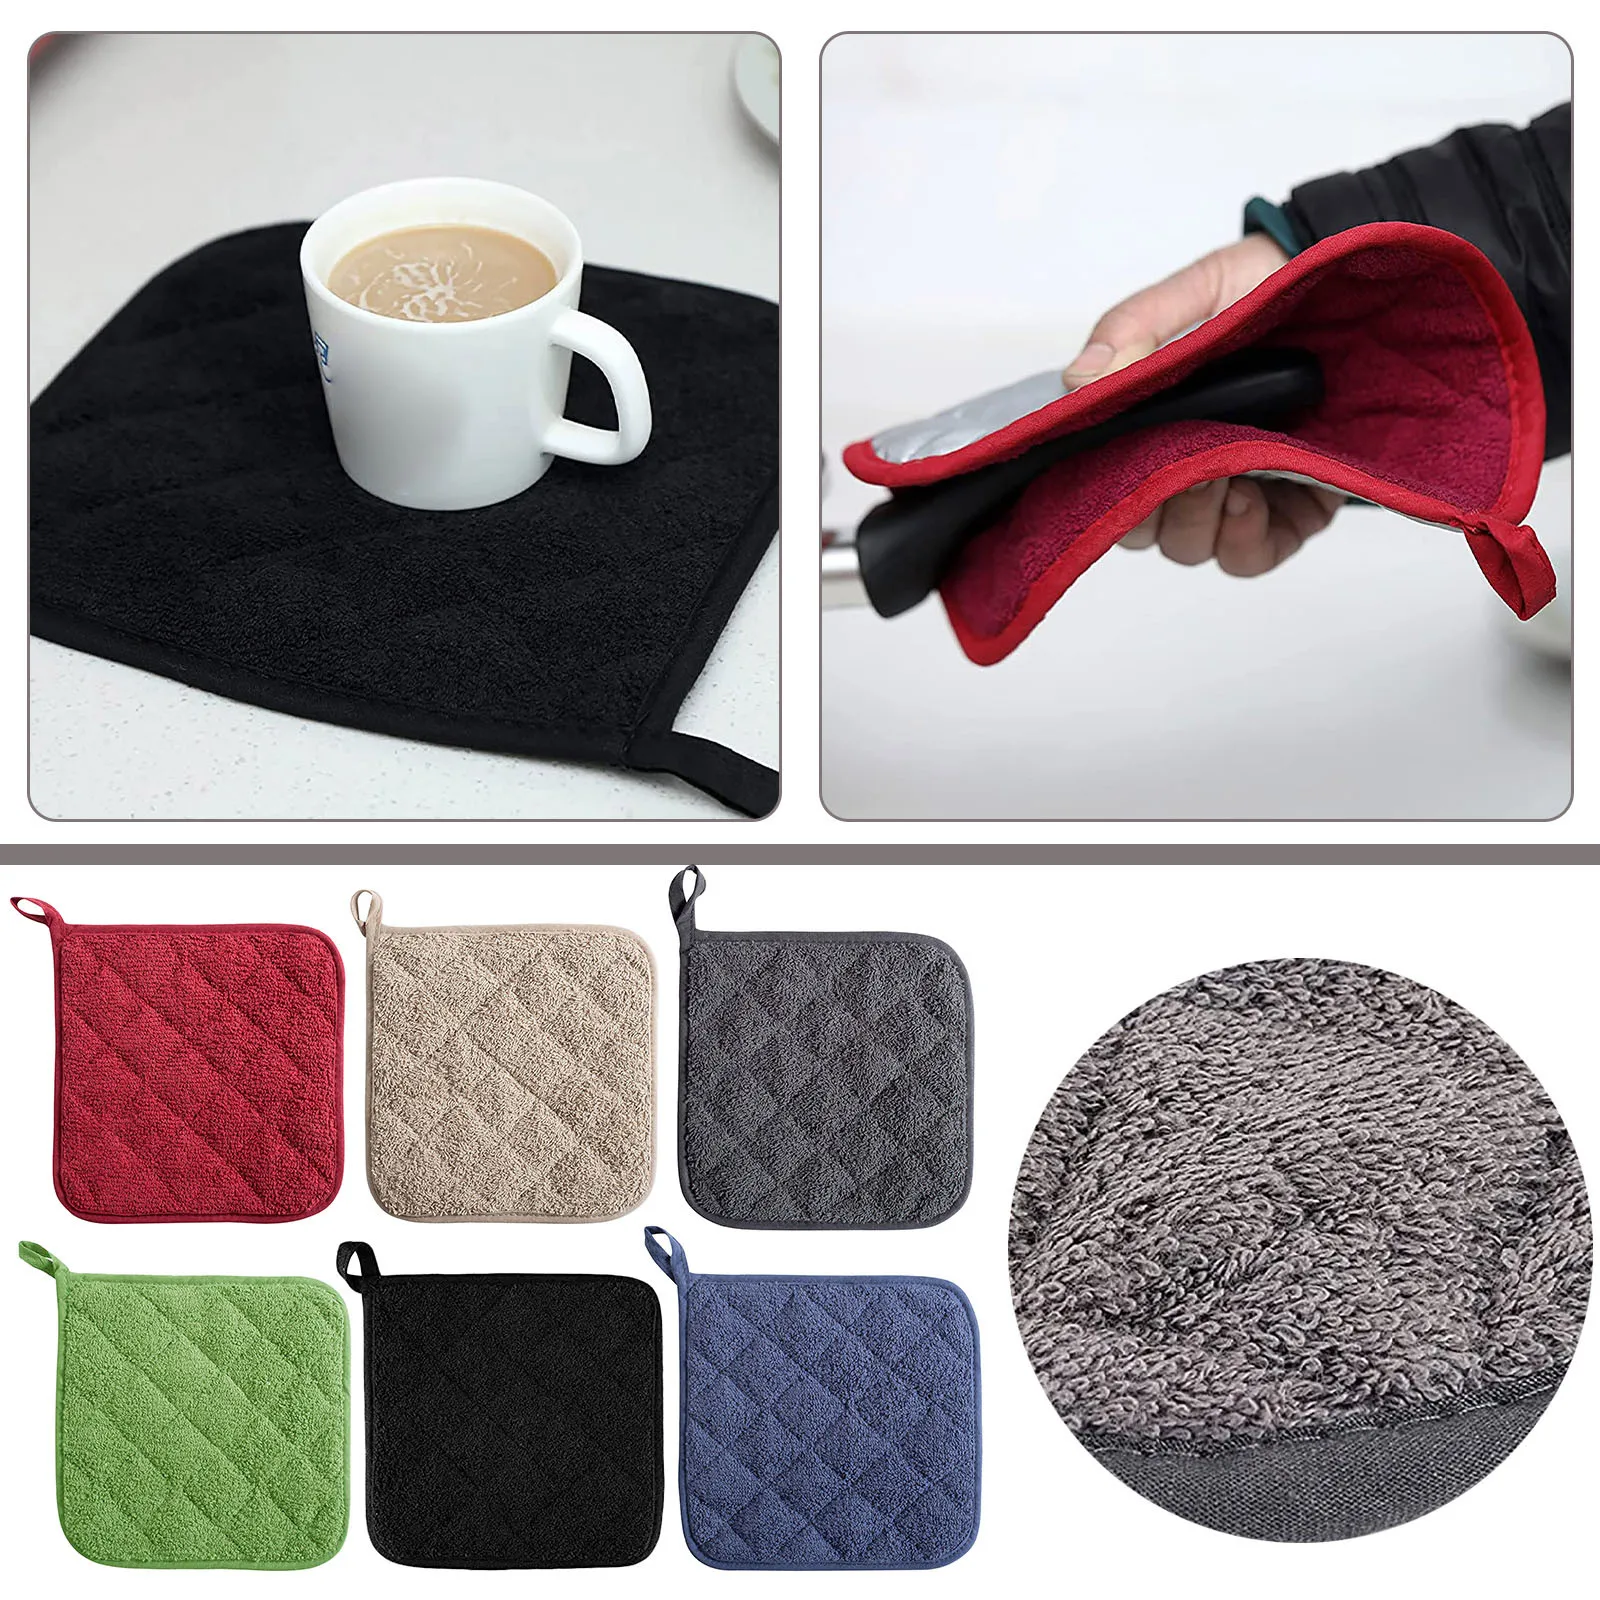 

Cotton Table Toweling Heat Insulation Mat Microwave Glove Pan Oven Towel Mitts Cloth Resistant Kitchen Placemats Pot Holder #50